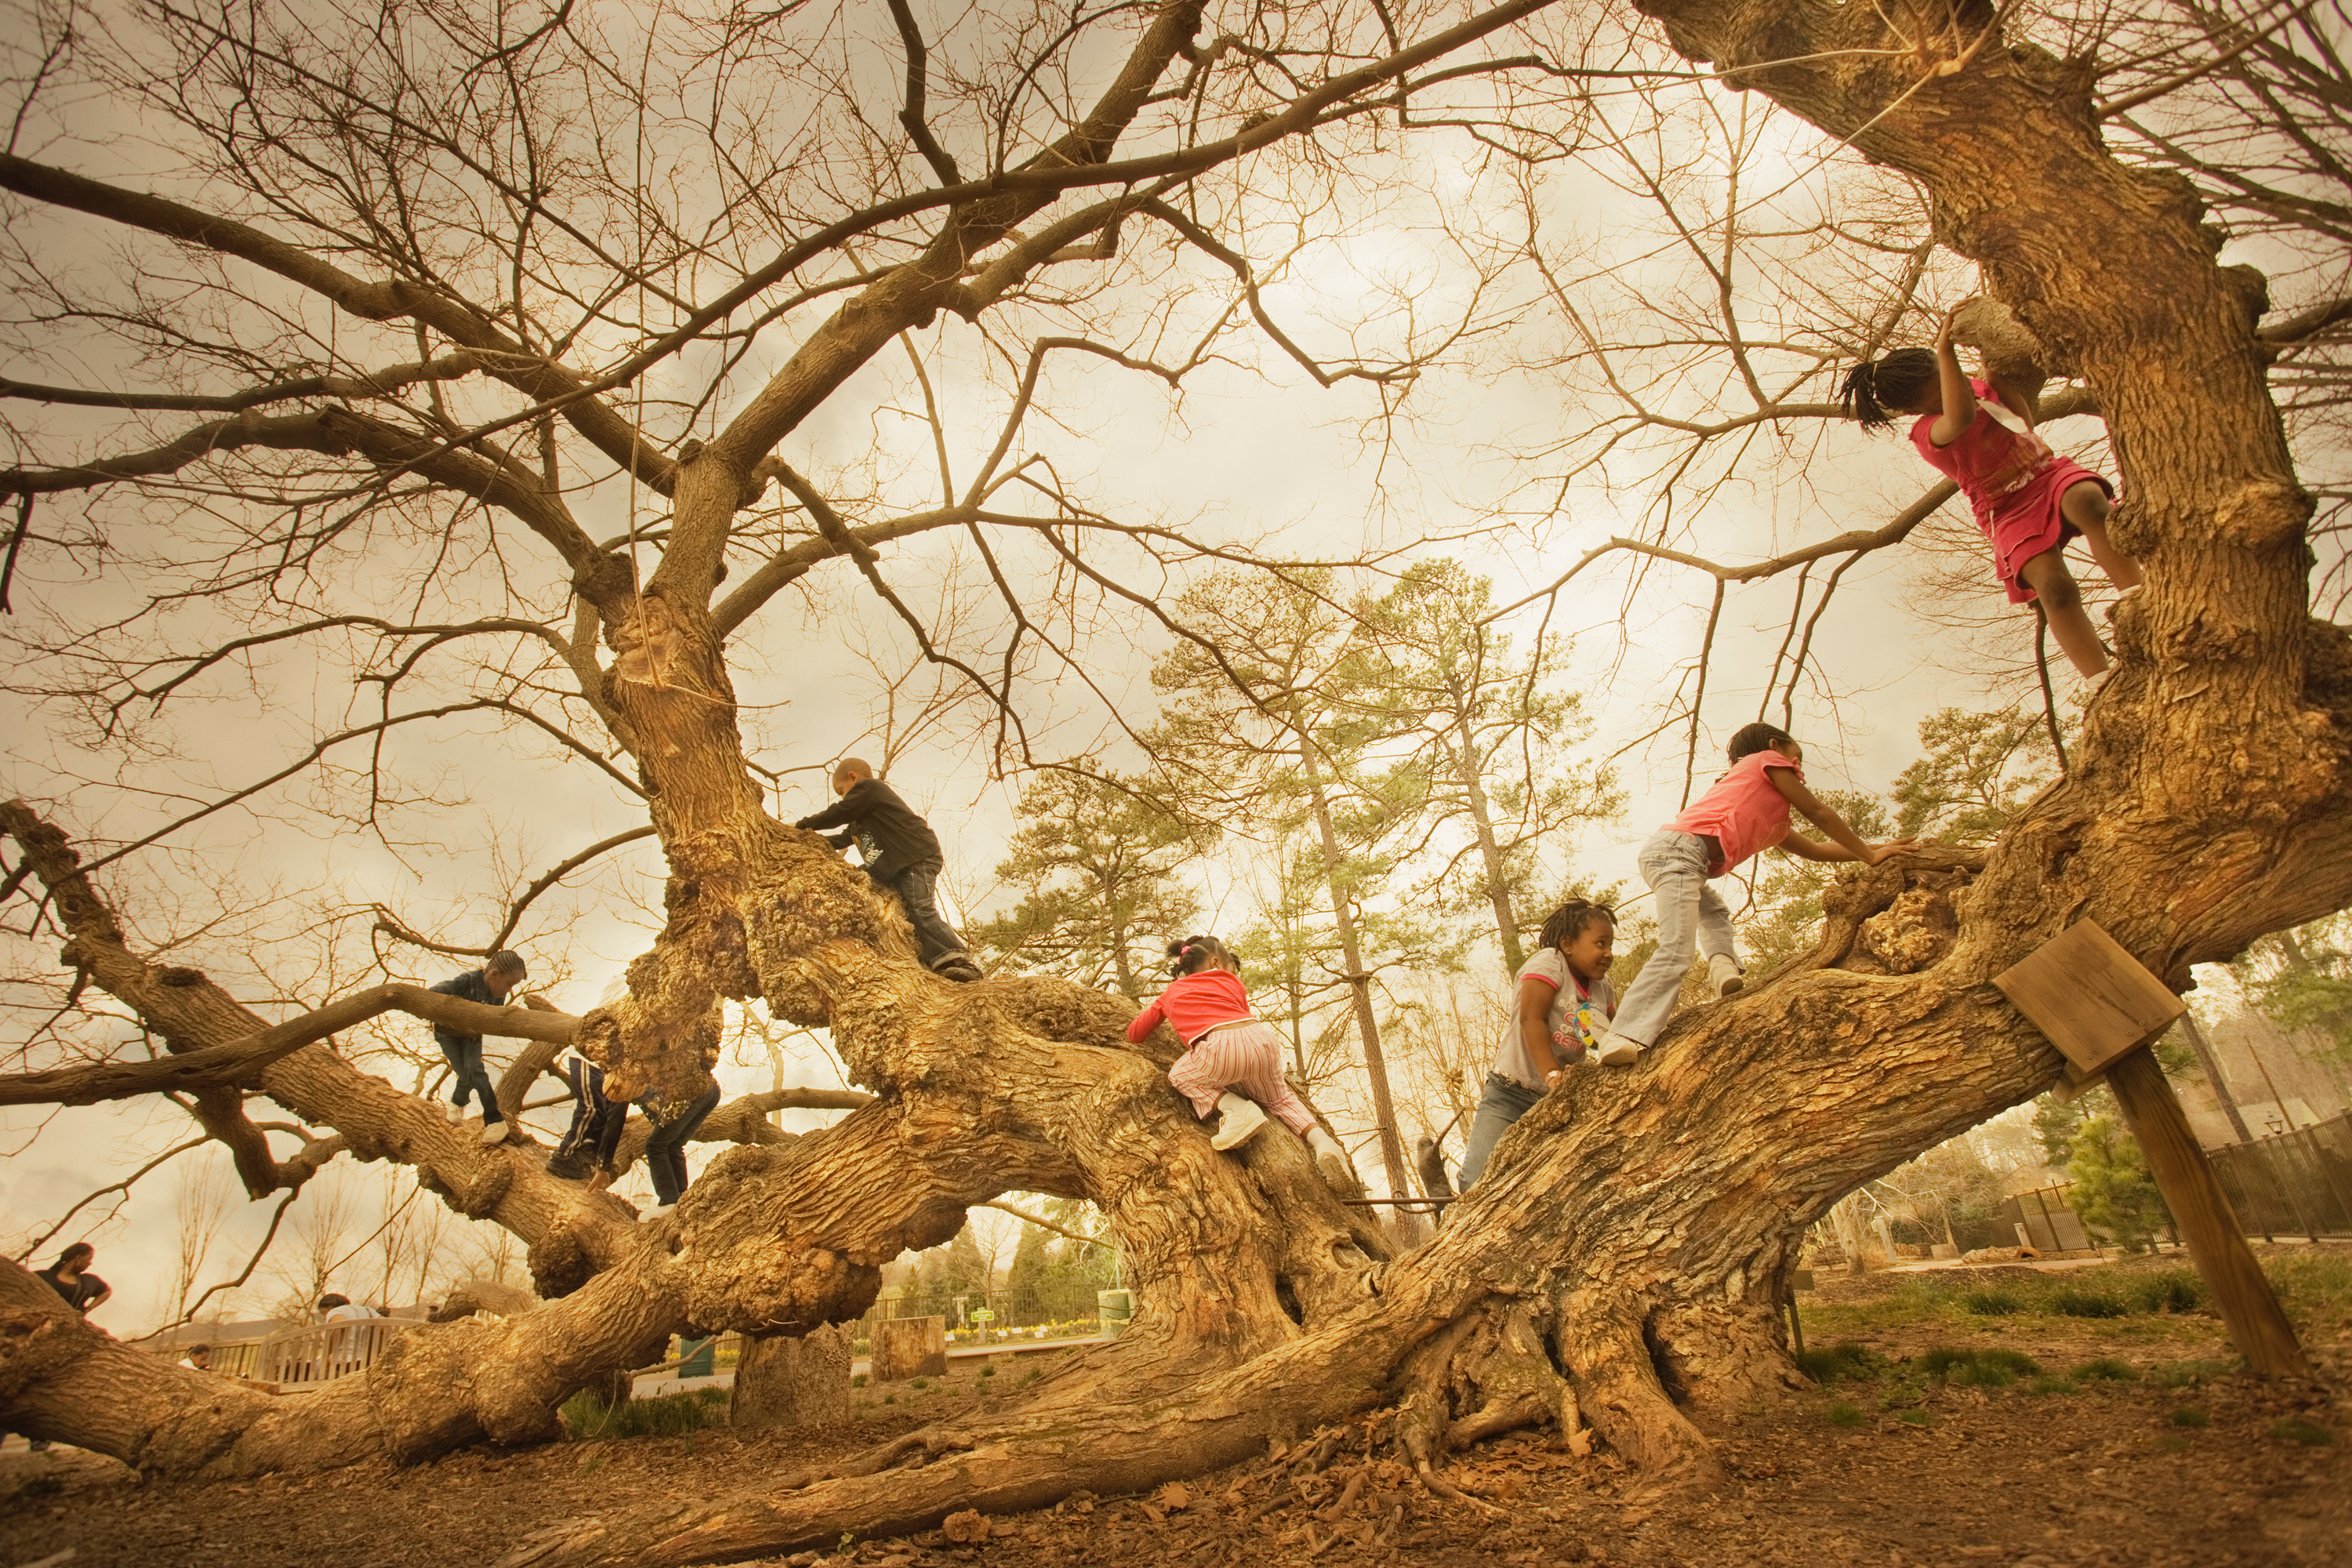 Kids climbing on the Mulberry Tree at Ginter Image by Robert Llewellyn